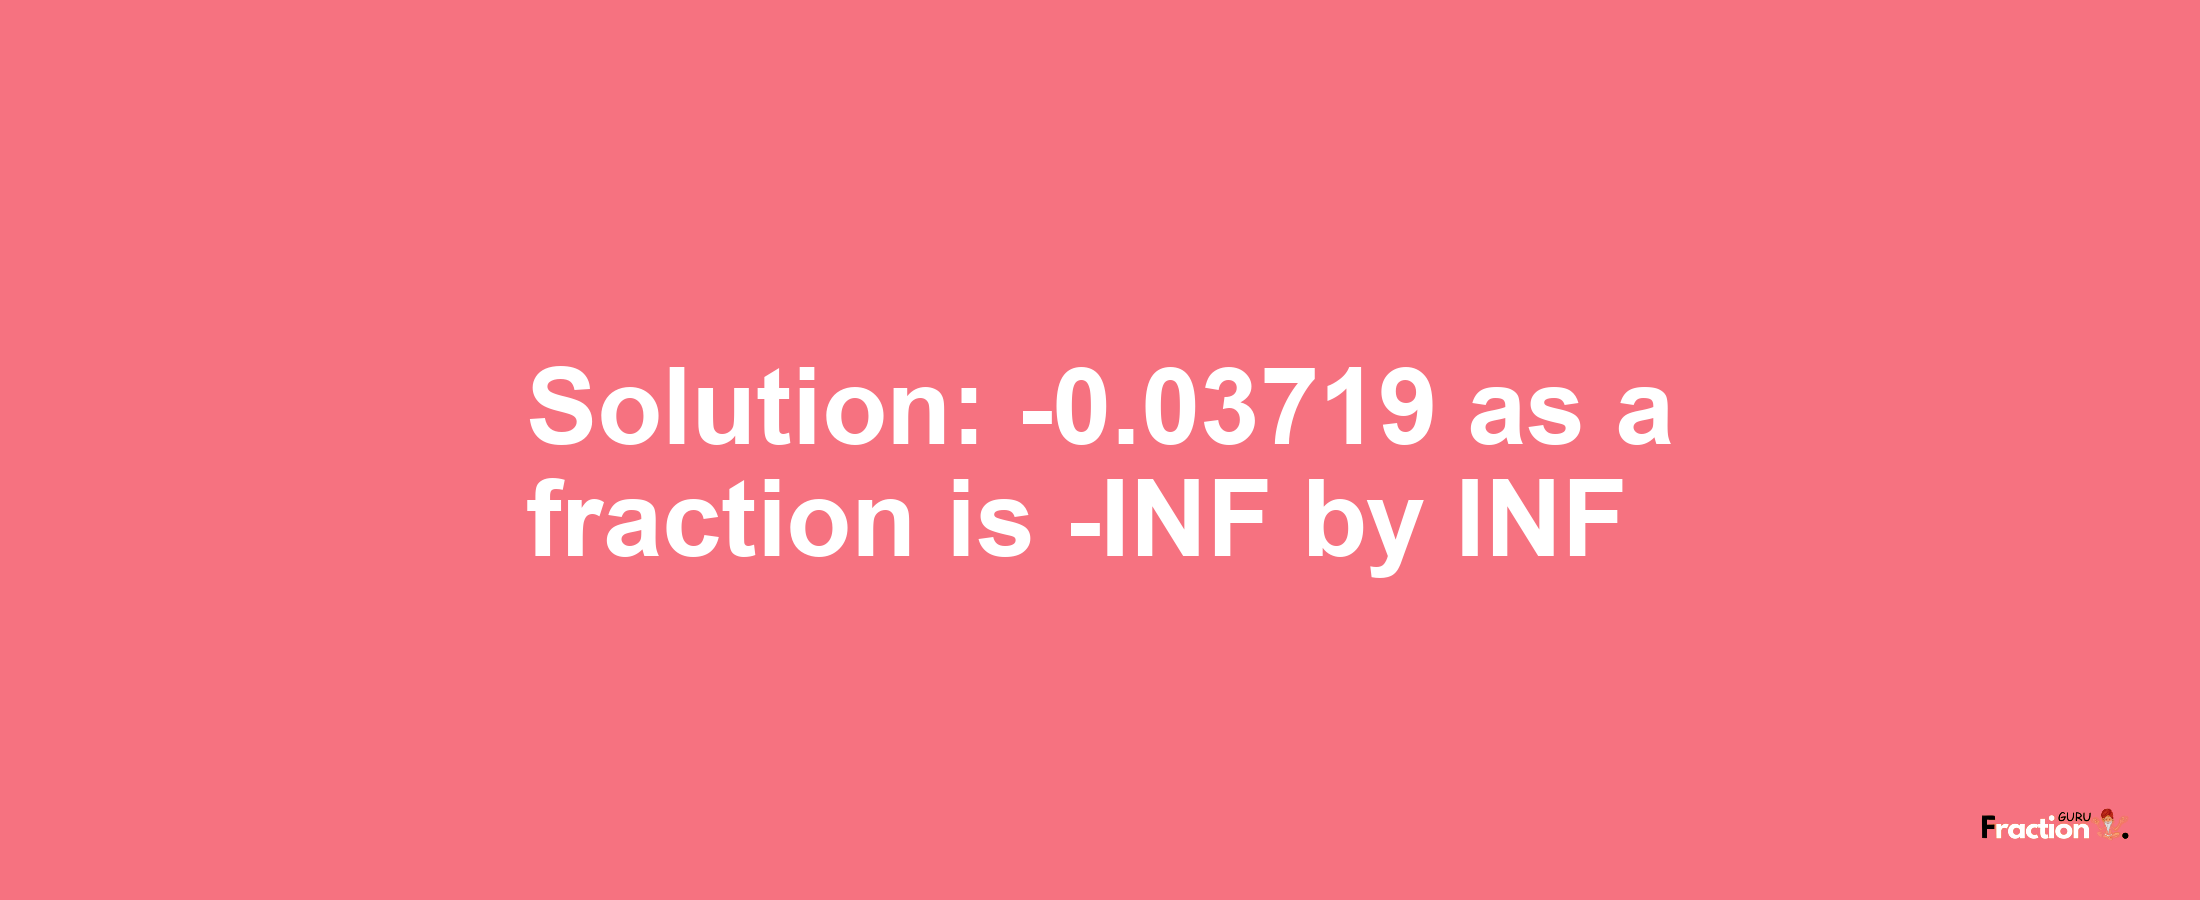 Solution:-0.03719 as a fraction is -INF/INF